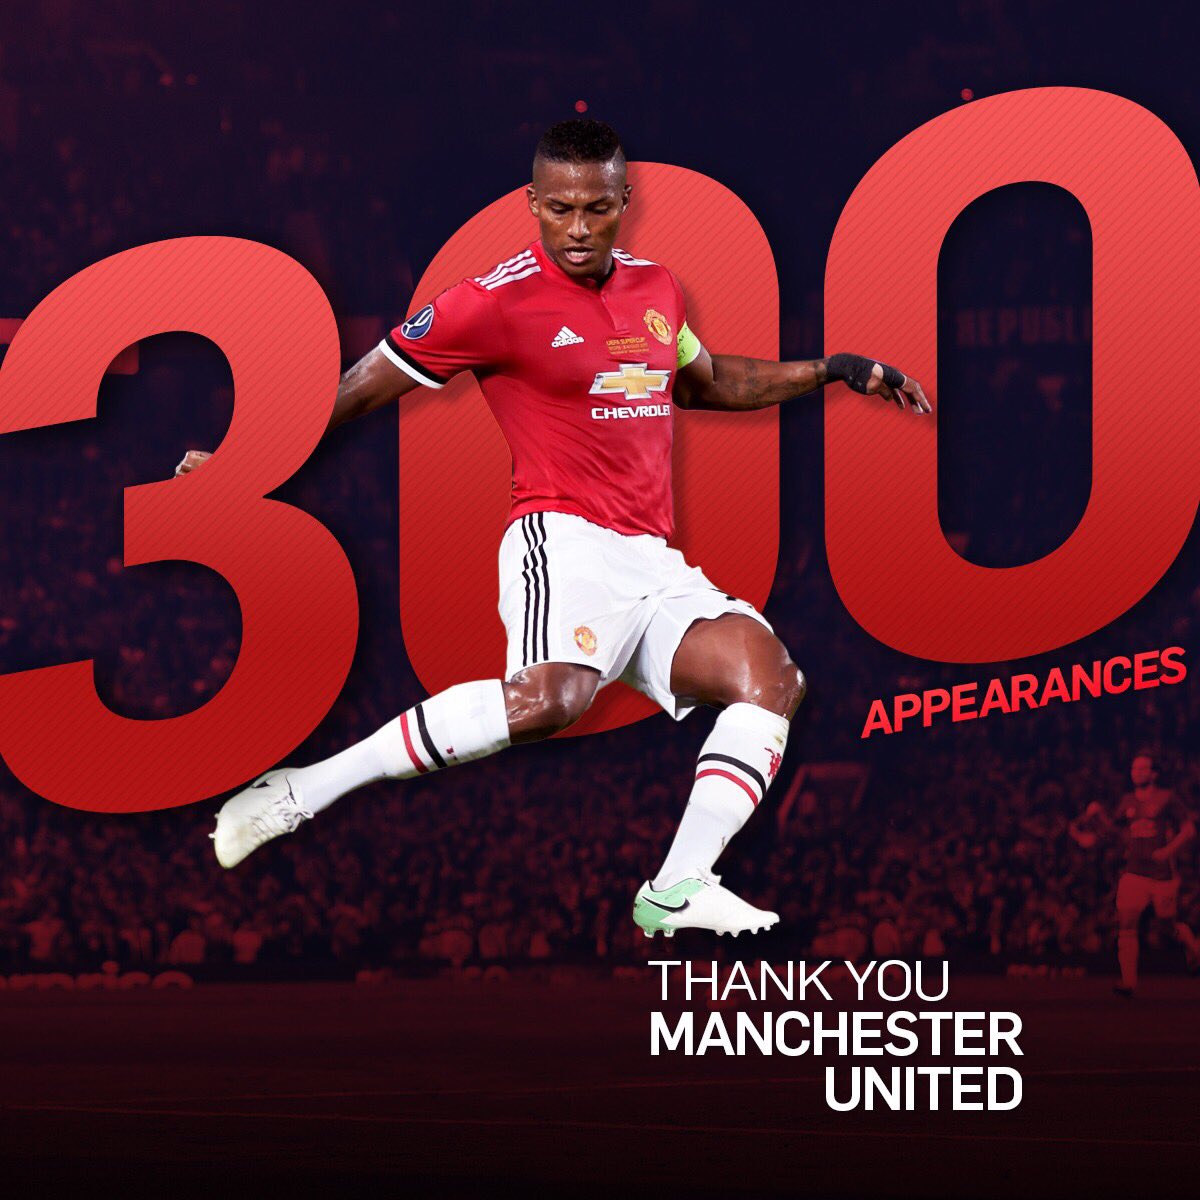 Antonio Valencia On Twitter Very Happy To Have Played My 300 Match With This Great Team Manutd Let S Go For The Main Objectives